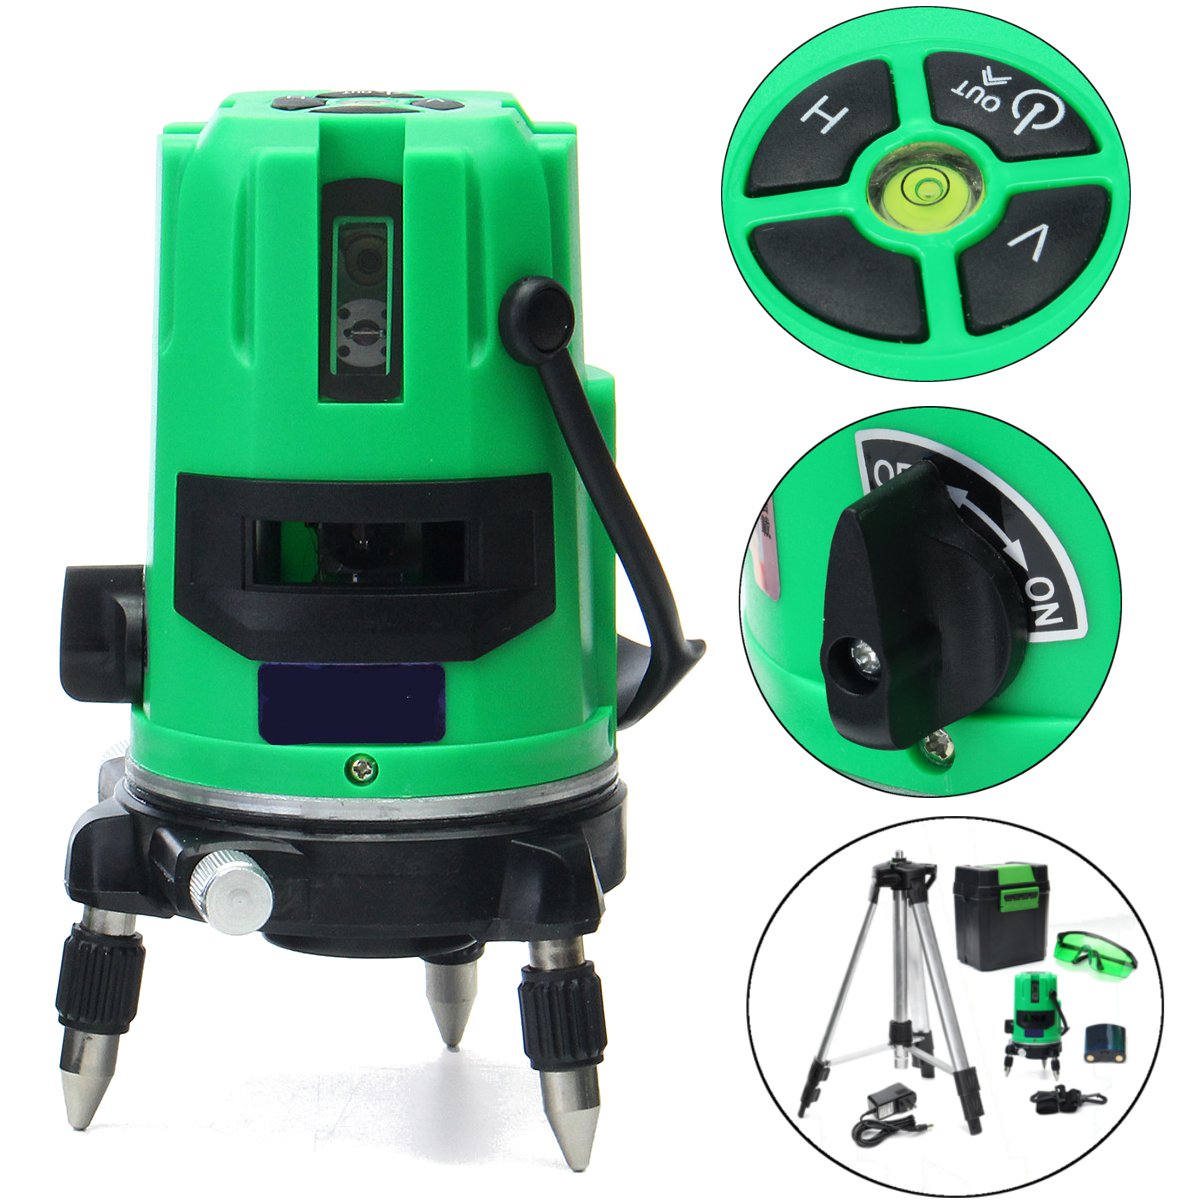 Green-2-Line-2-Points-Laser-Level-360-Rotary-Laser-Line-Self-Leveling-with-Tripod-1166735-8